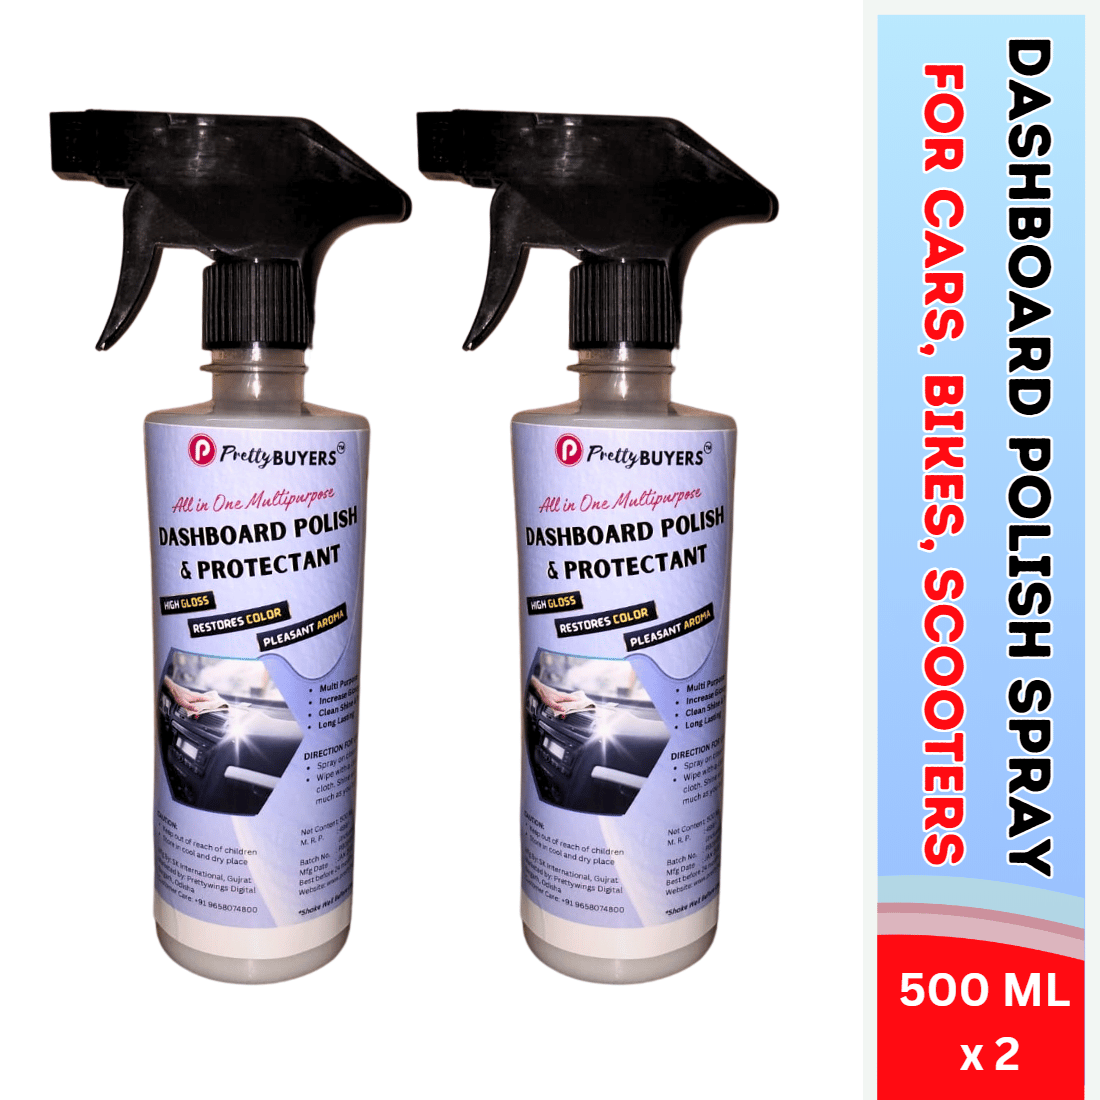 PrettyBUYERS Dashboard Polish and Protectant Spray 500 ML | Car Dashboard Cleaner | Protects and Shines Interiors of Cars, Bikes, Motorcycles, and Scooters Pack of 2